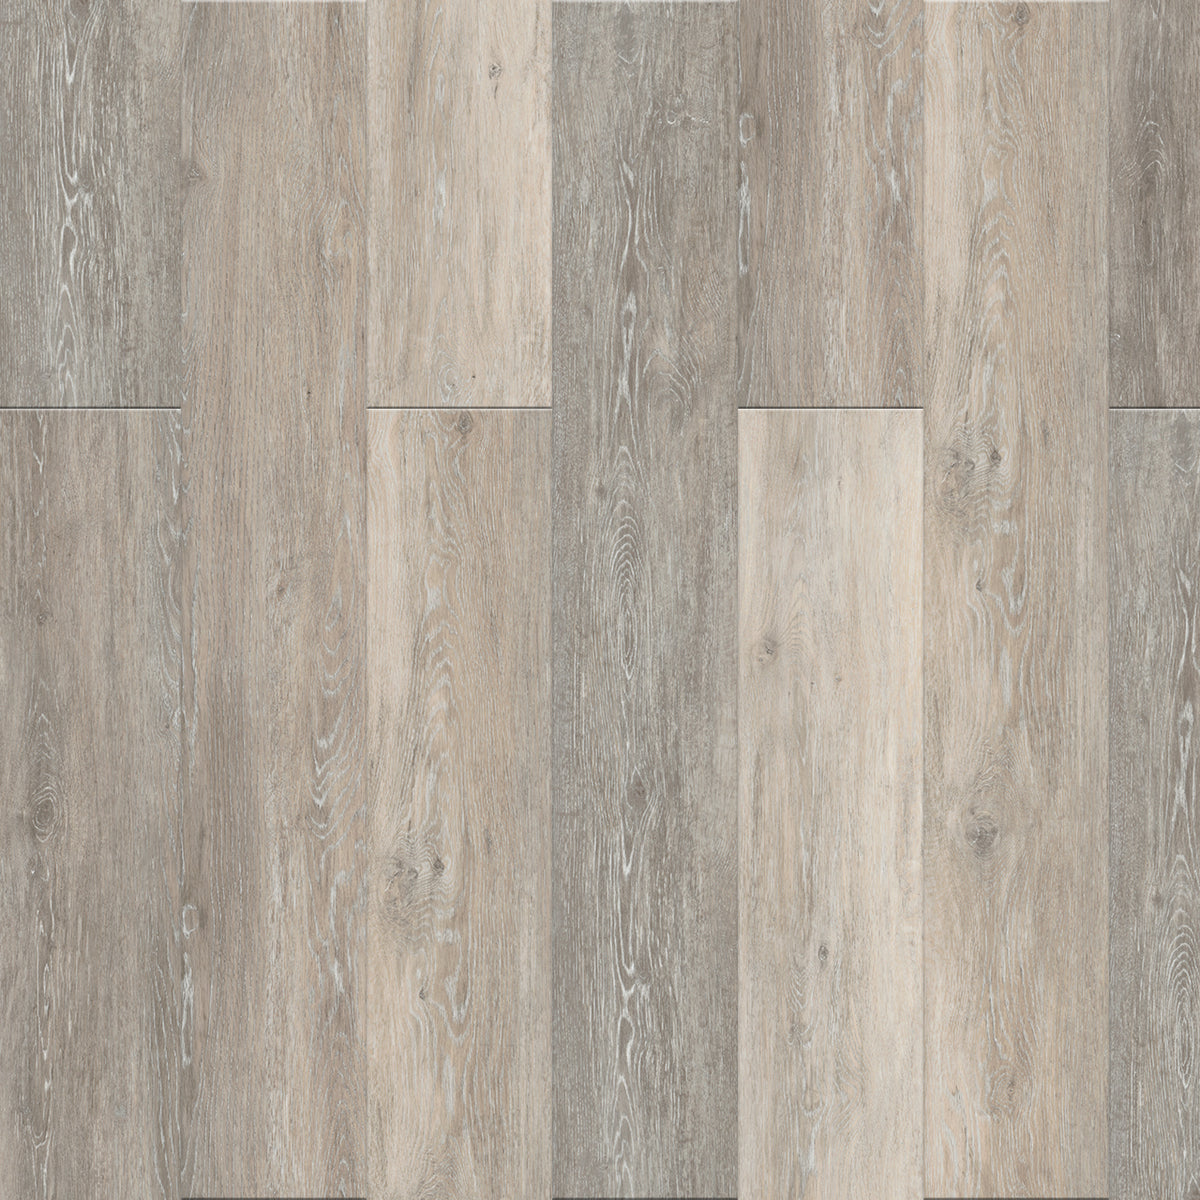 Engineered Floors - Triumph Collection - Renewal - 7 in. x 48 in. - HarmonyEngineered Floors - Triumph Collection - Renewal - 7 in. x 48 in. - Harmony